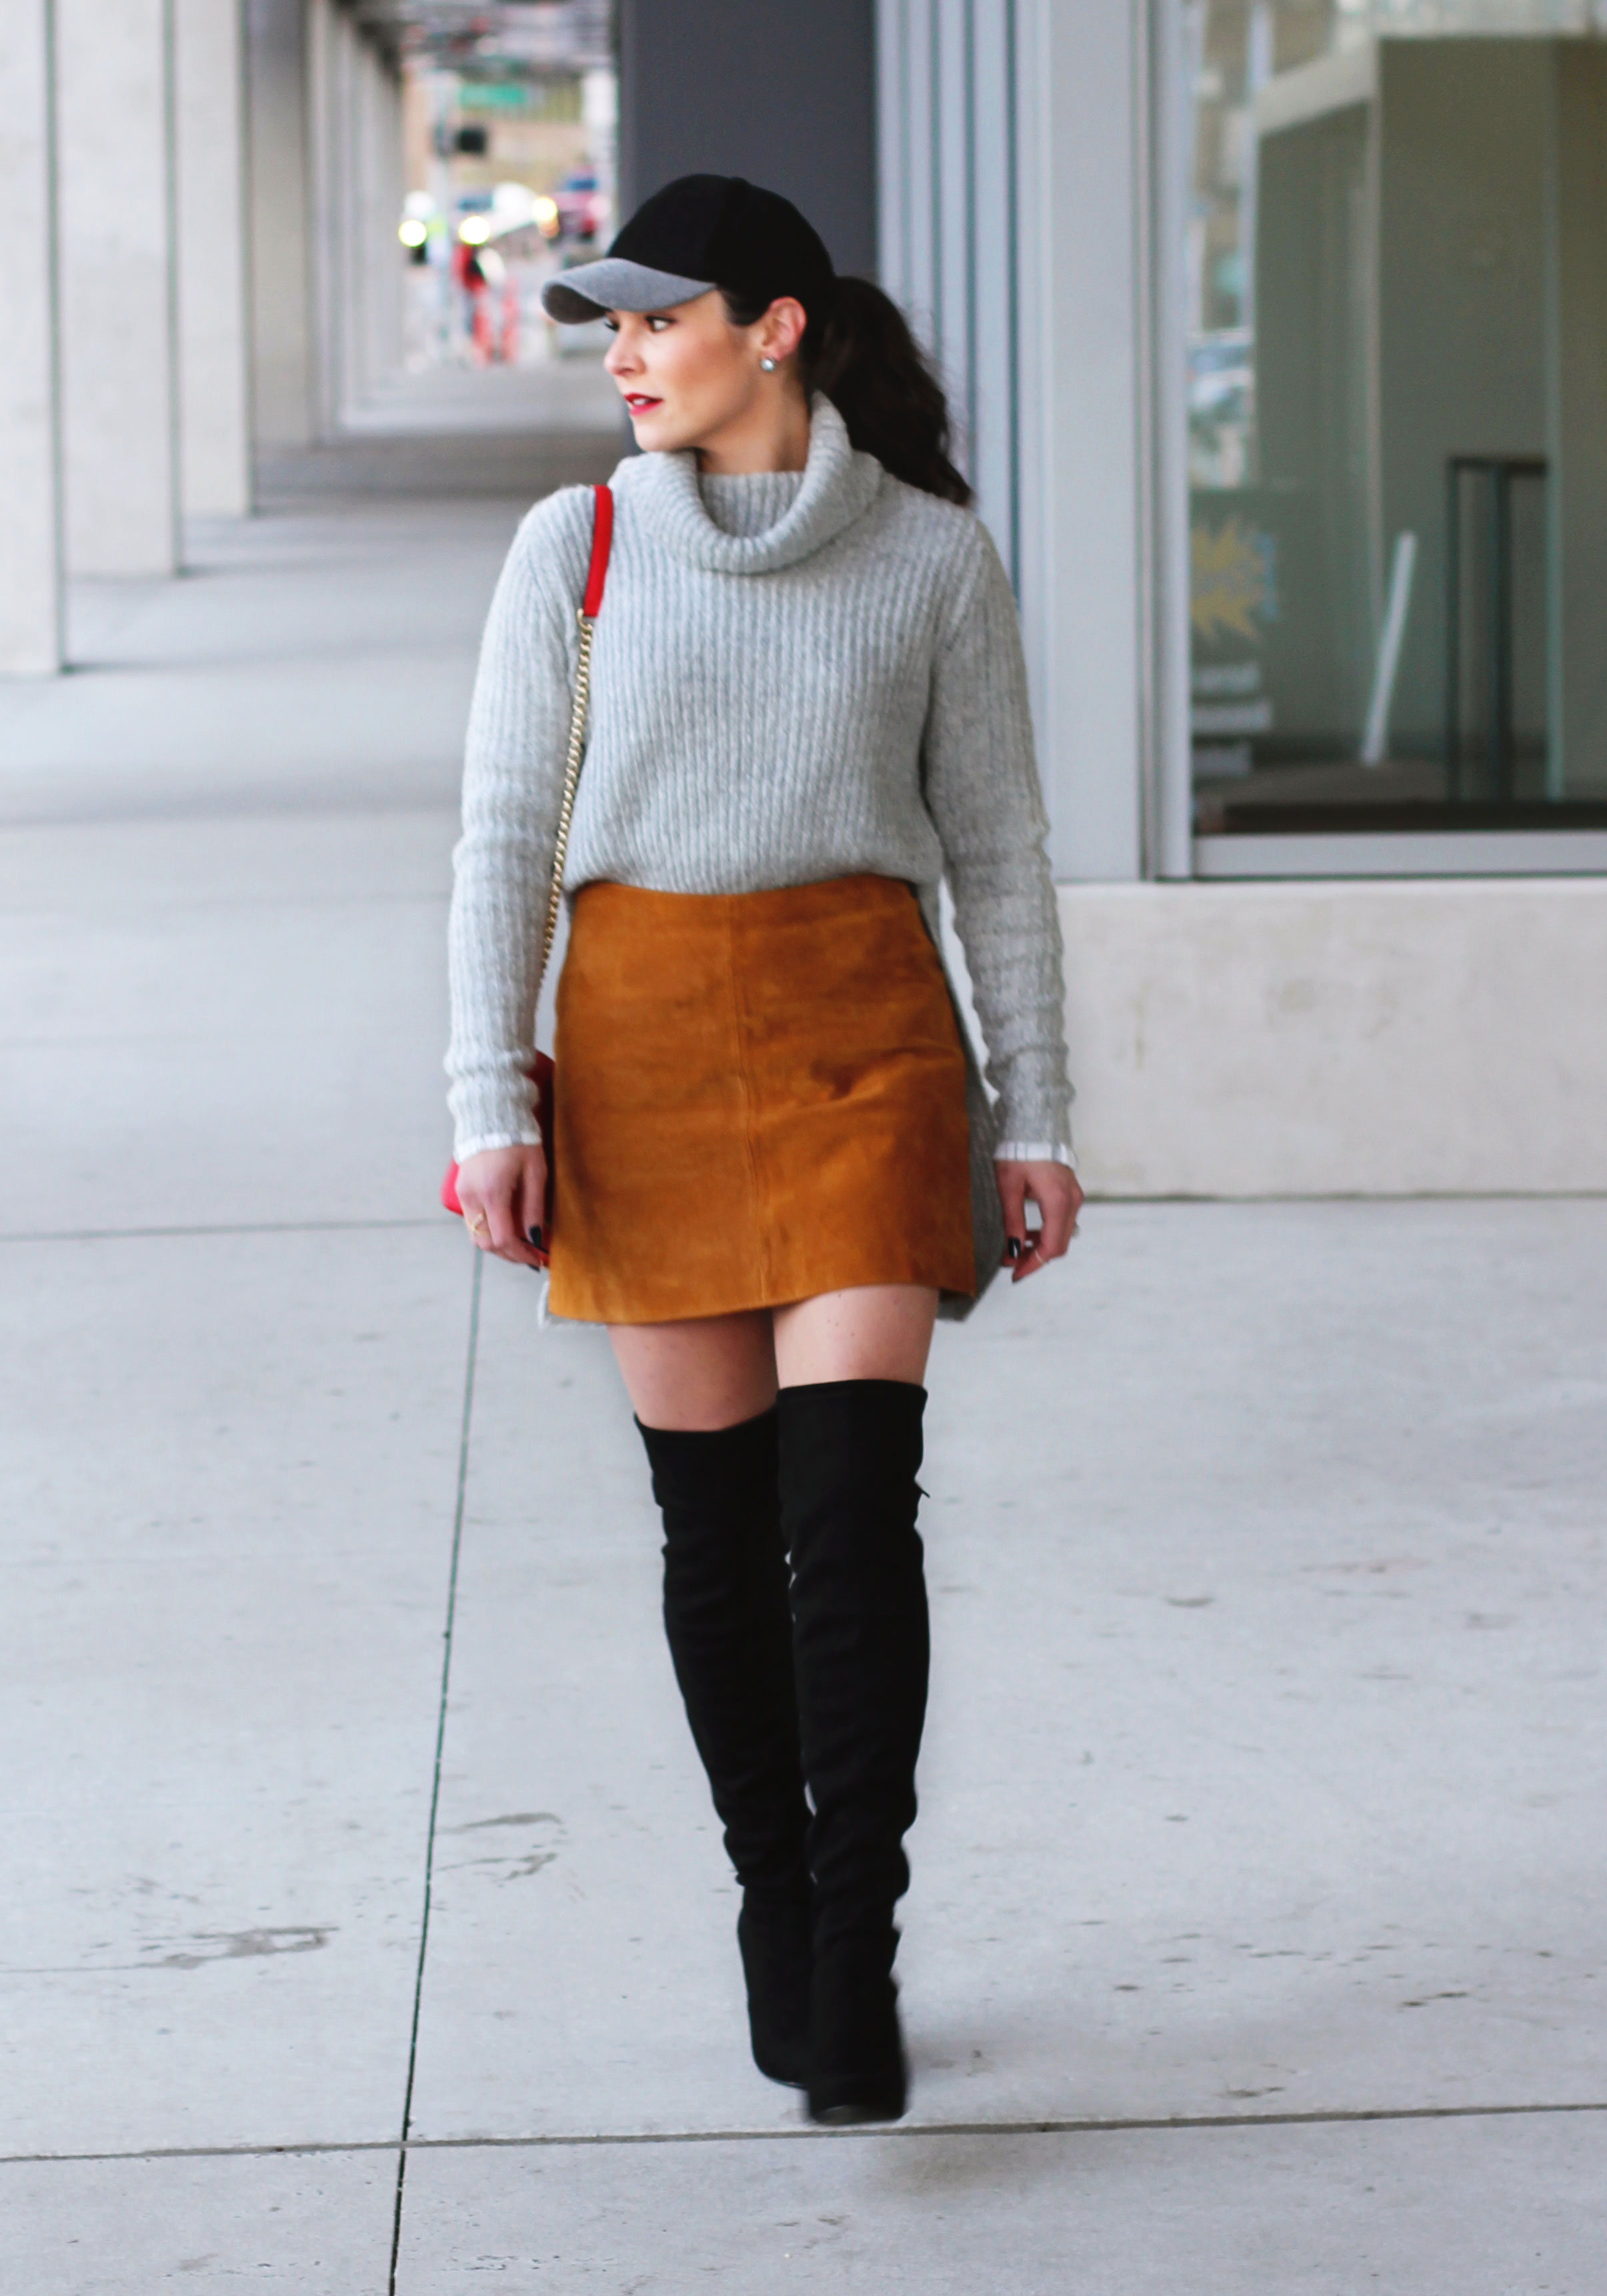 Winter Outfit, Sweater with Suede Skirt, Steve Madden Gorgeous Over The Knee Boots, Wool Baseball Hat, Red Rebecca Minkoff Avery Crossbody Bag 